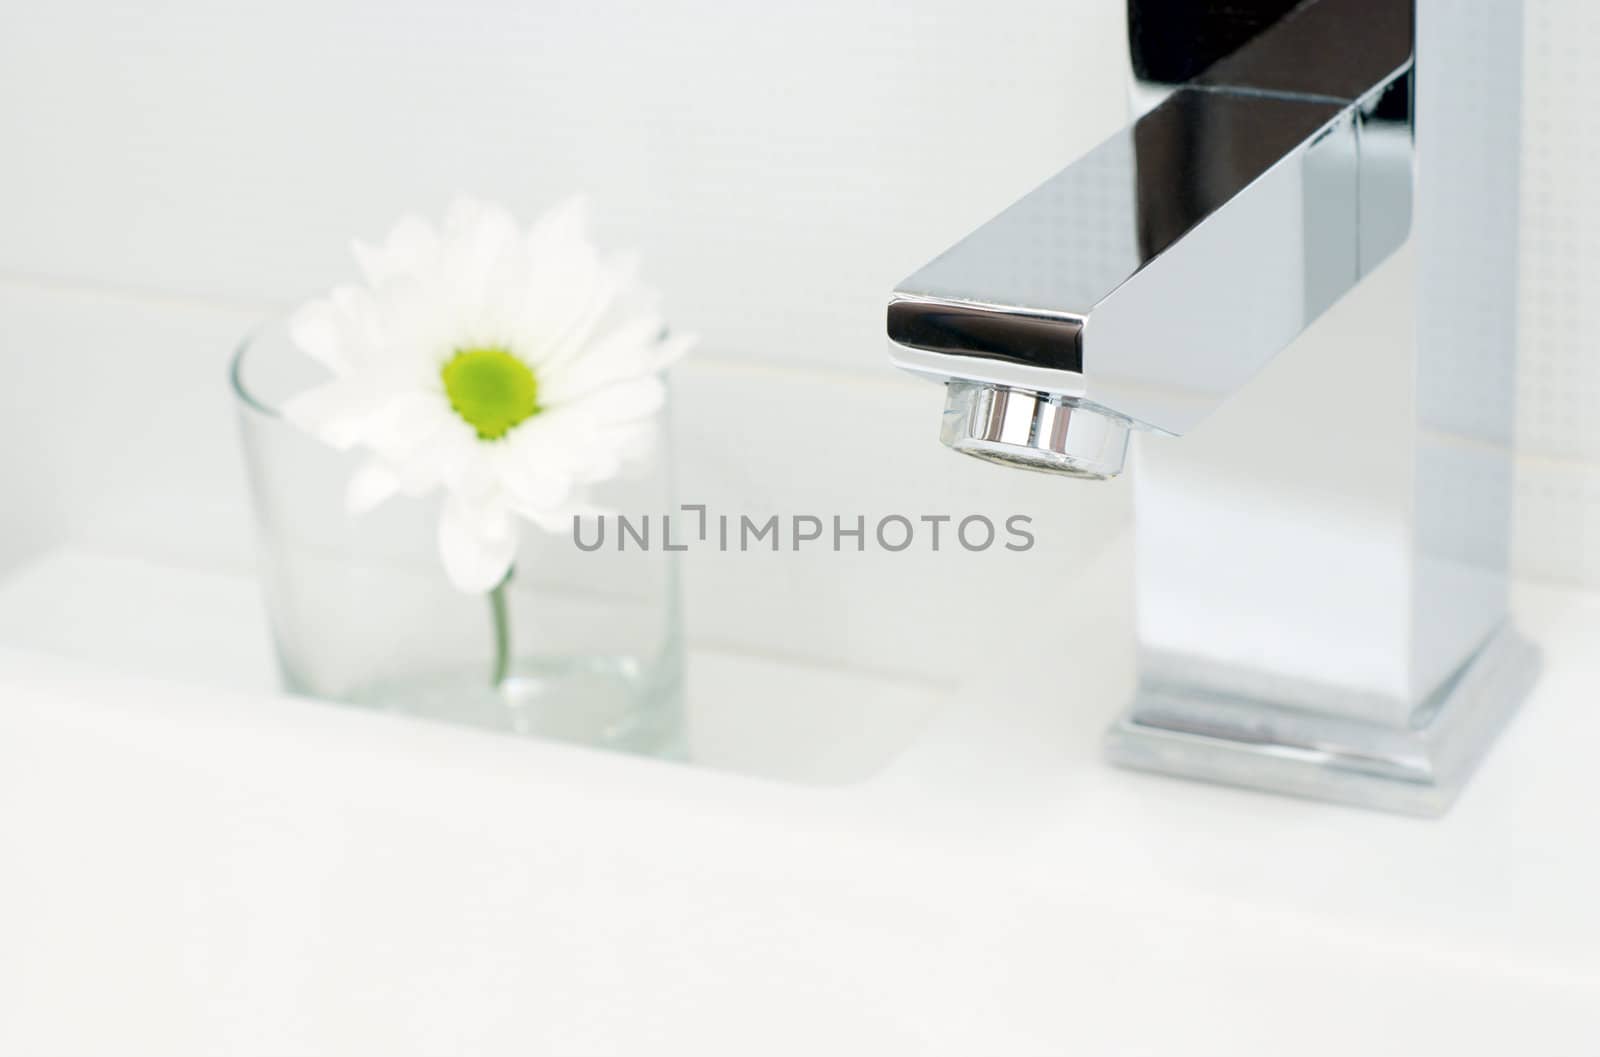 Chrome tap water and flower by kzen